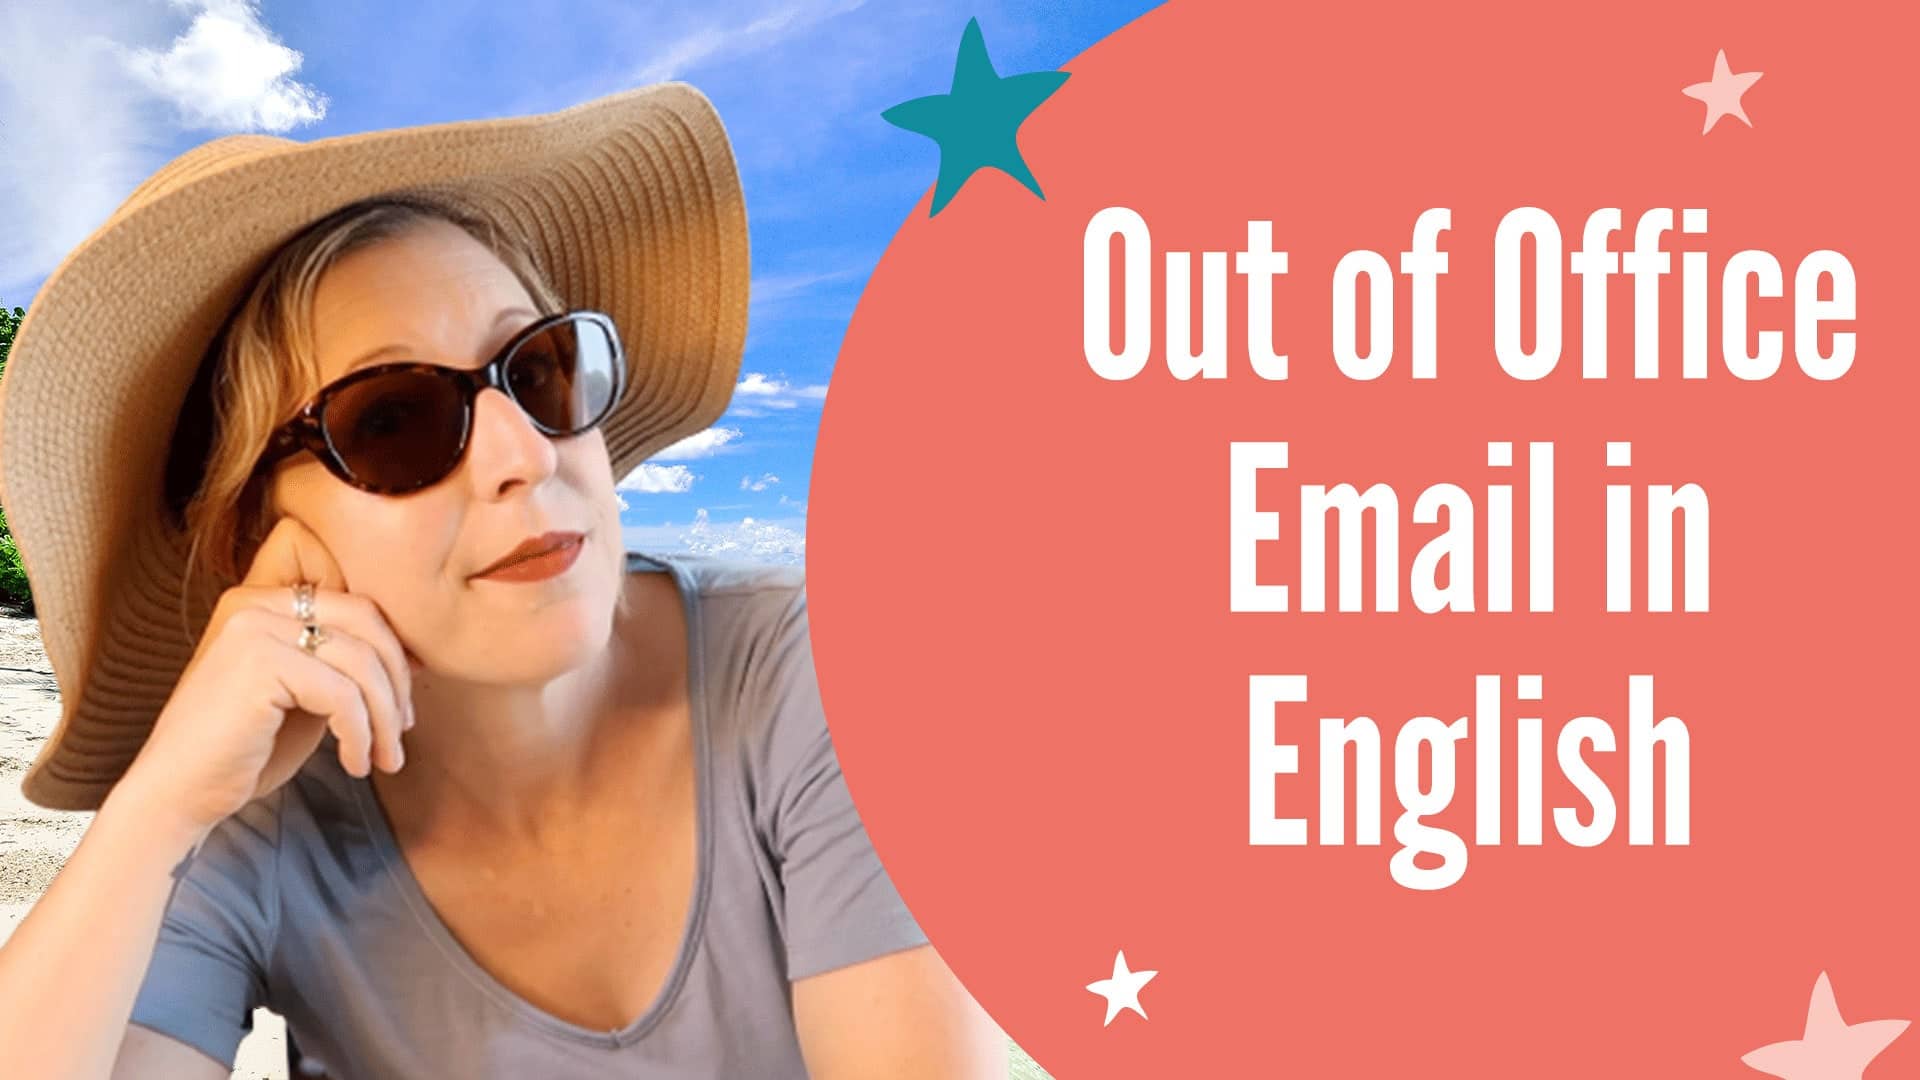 How to write an out of office email in English: 24 examples